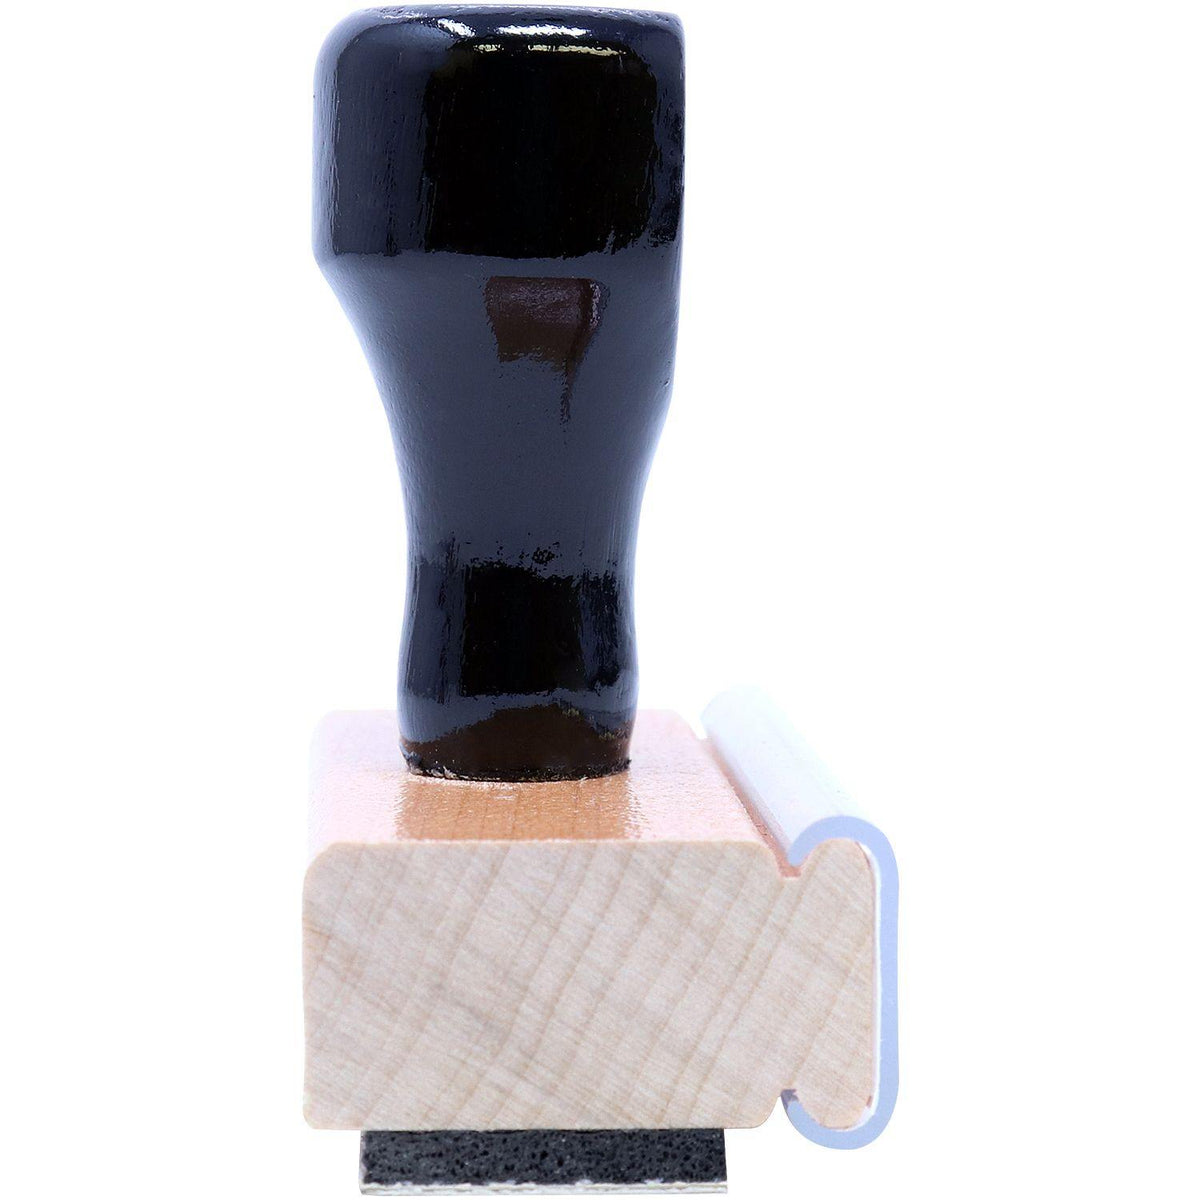 Side View of Installment Loan Rubber Stamp